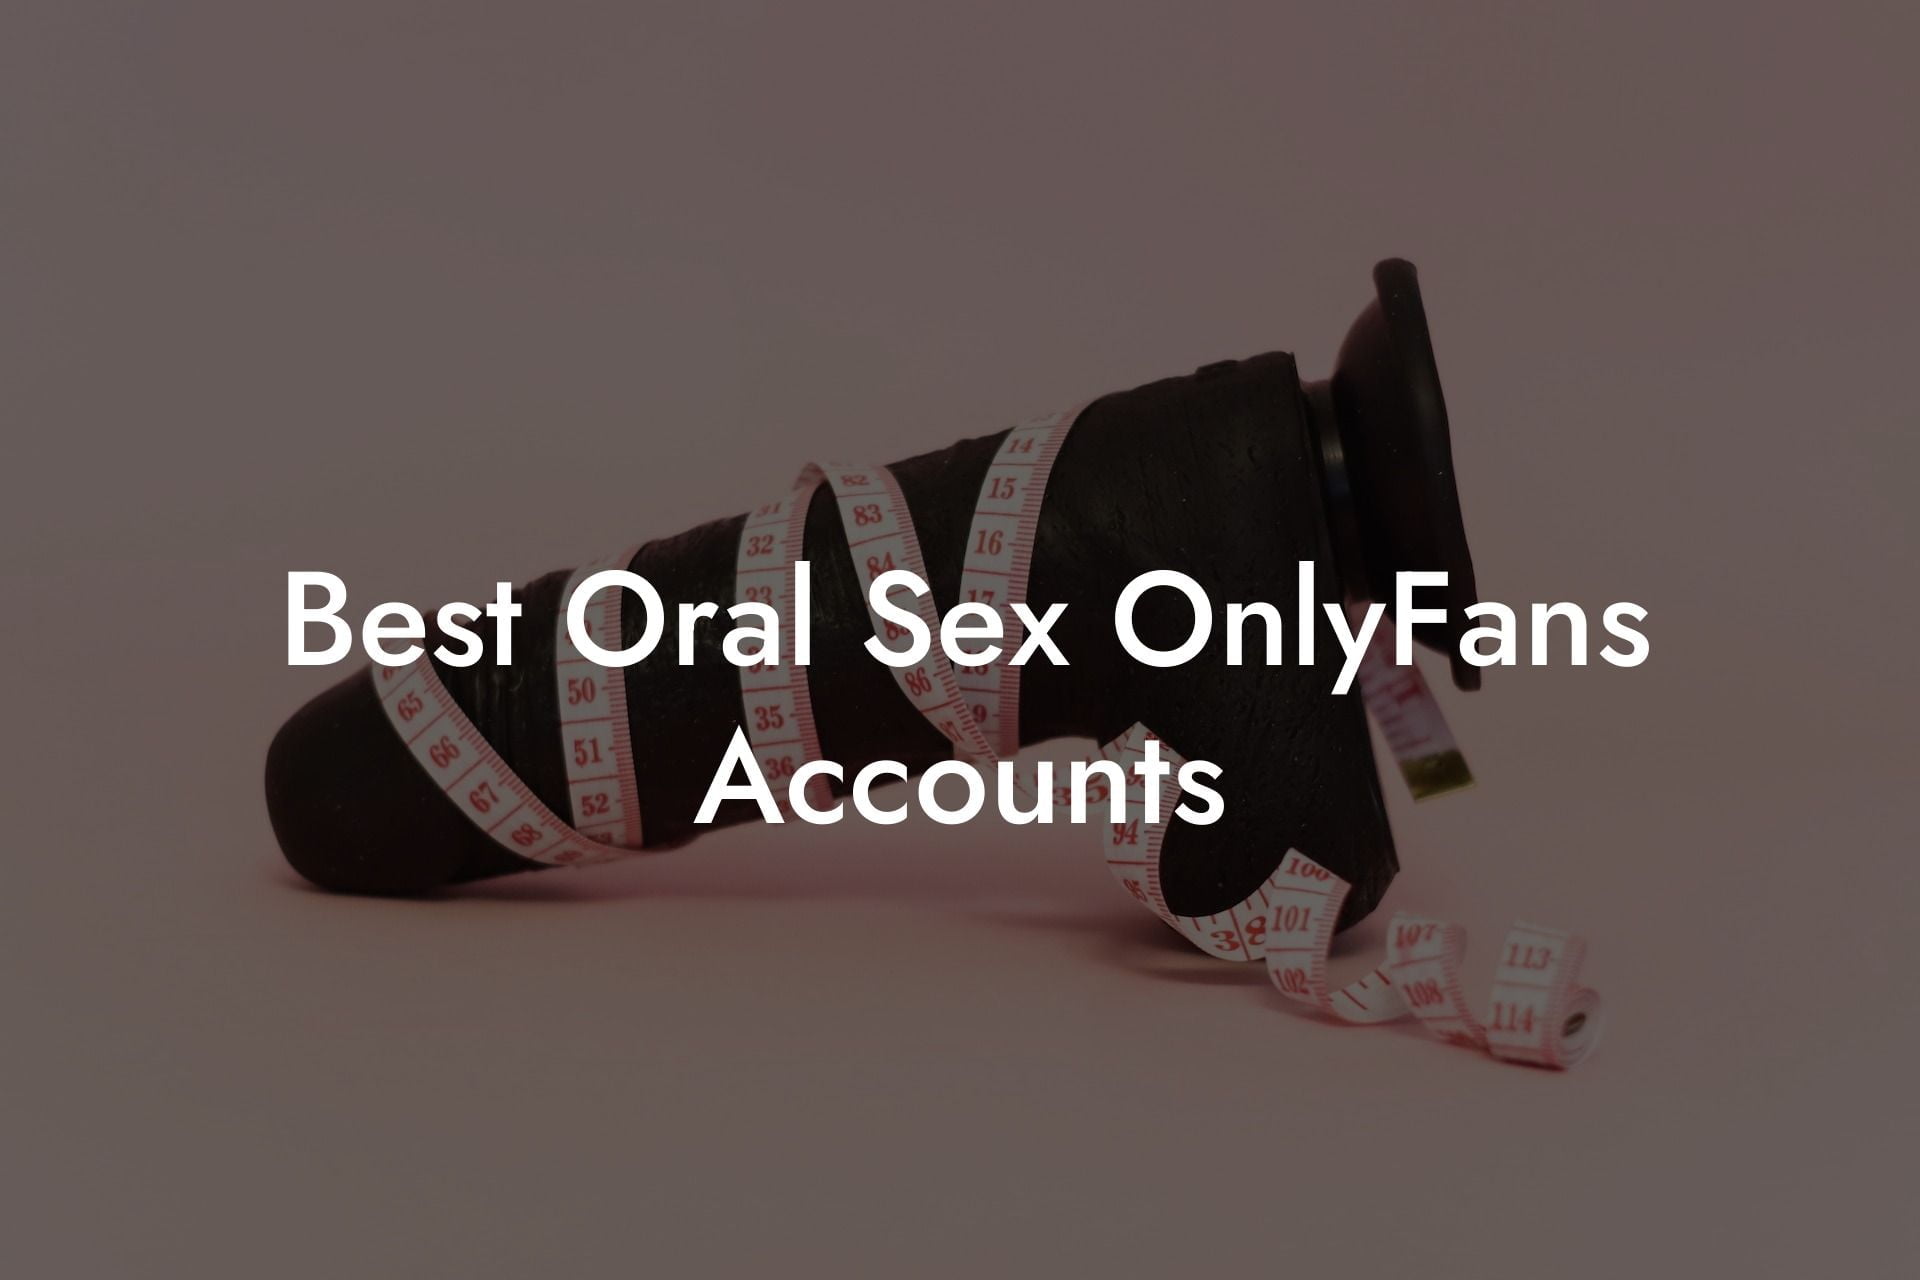 Best Oral Sex OnlyFans Accounts